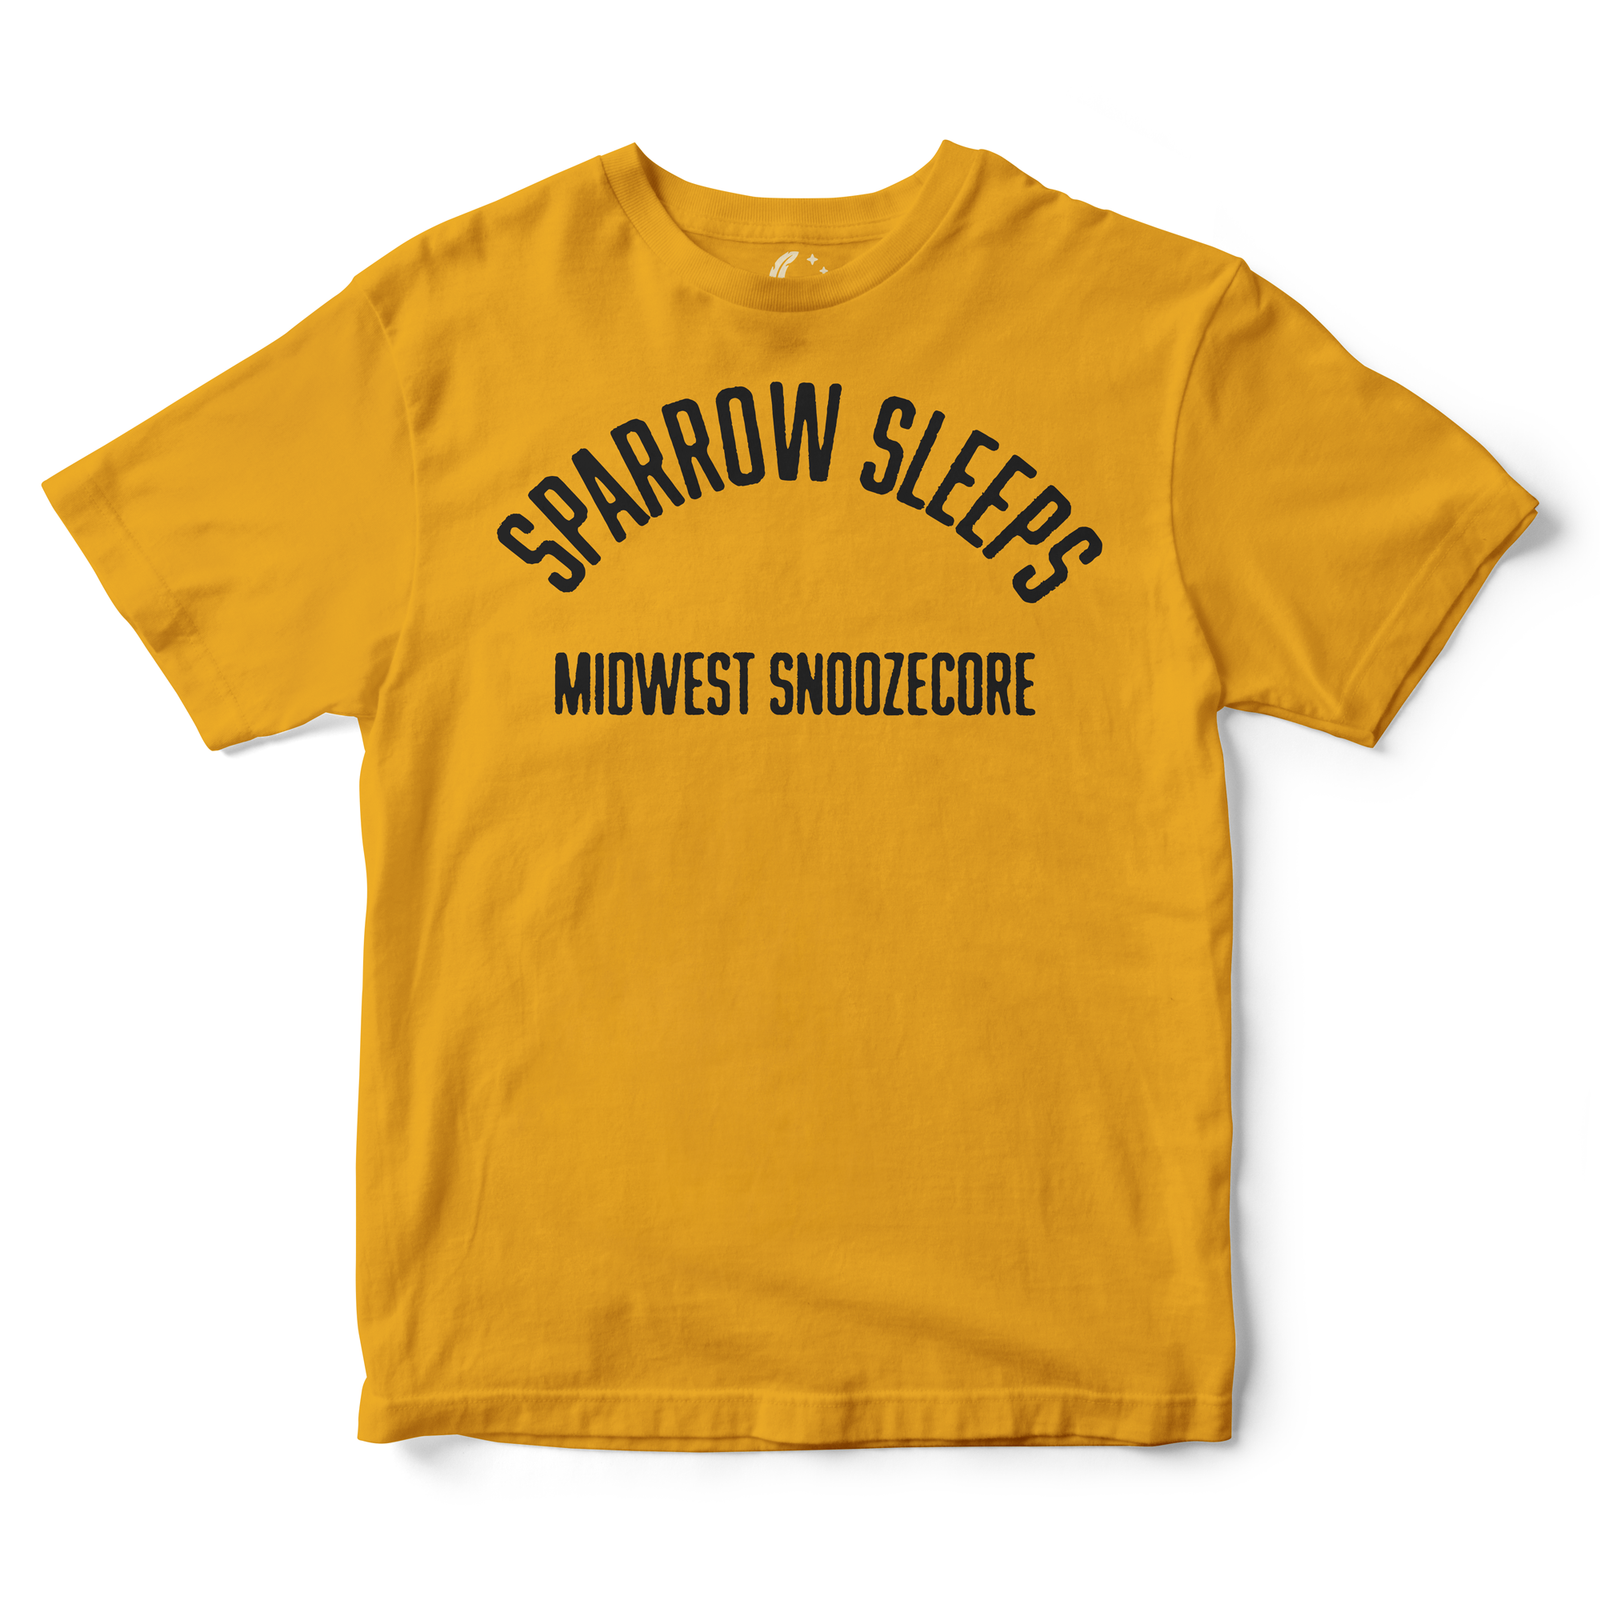 Midwest Snoozecore Adult T-Shirt (Mustard)